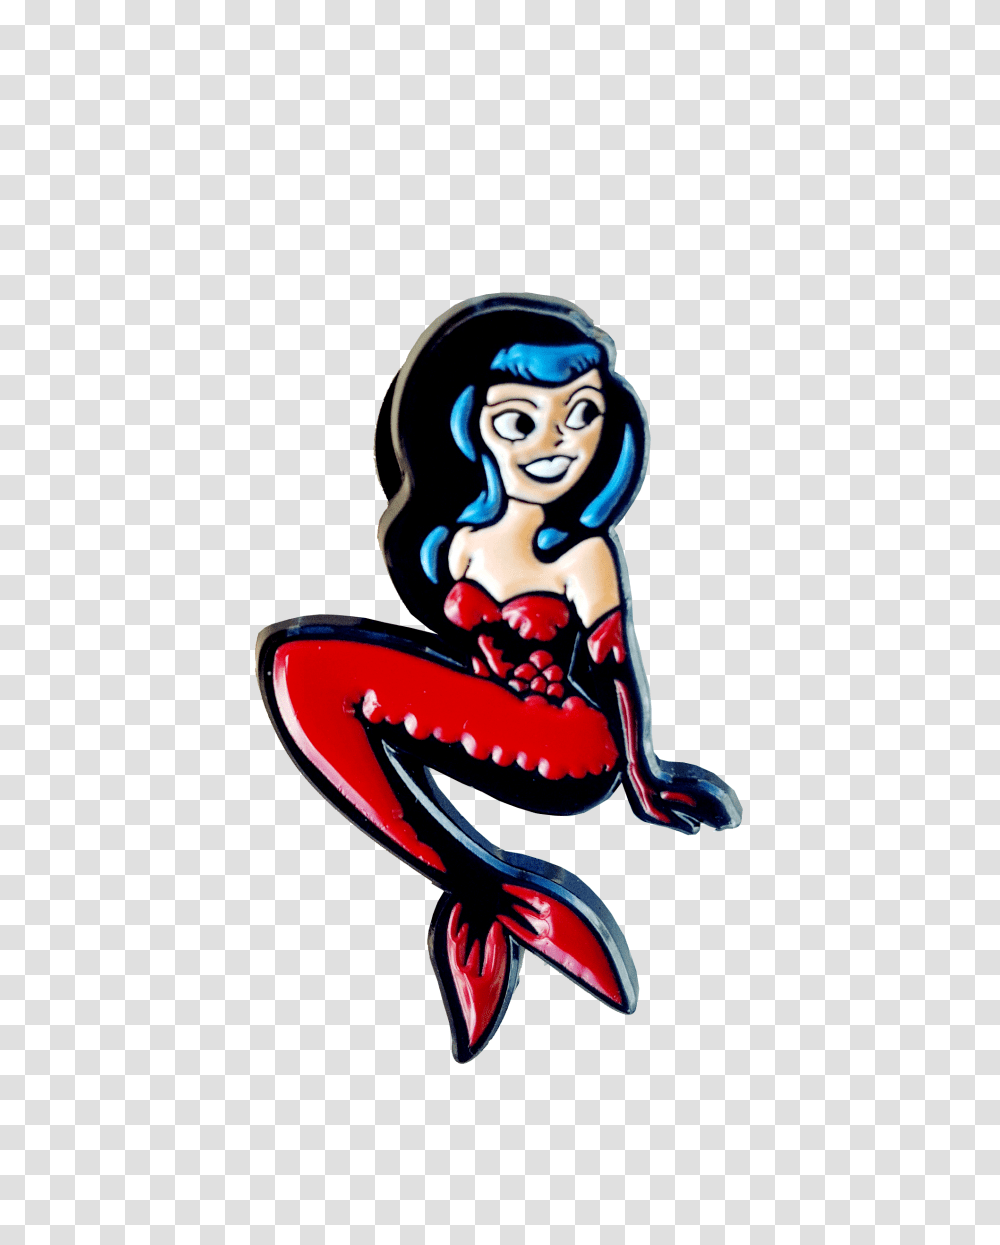 Pins Patches Lapel Pins Pin Up Mermaid, Female, Leisure Activities, Dance Pose Transparent Png